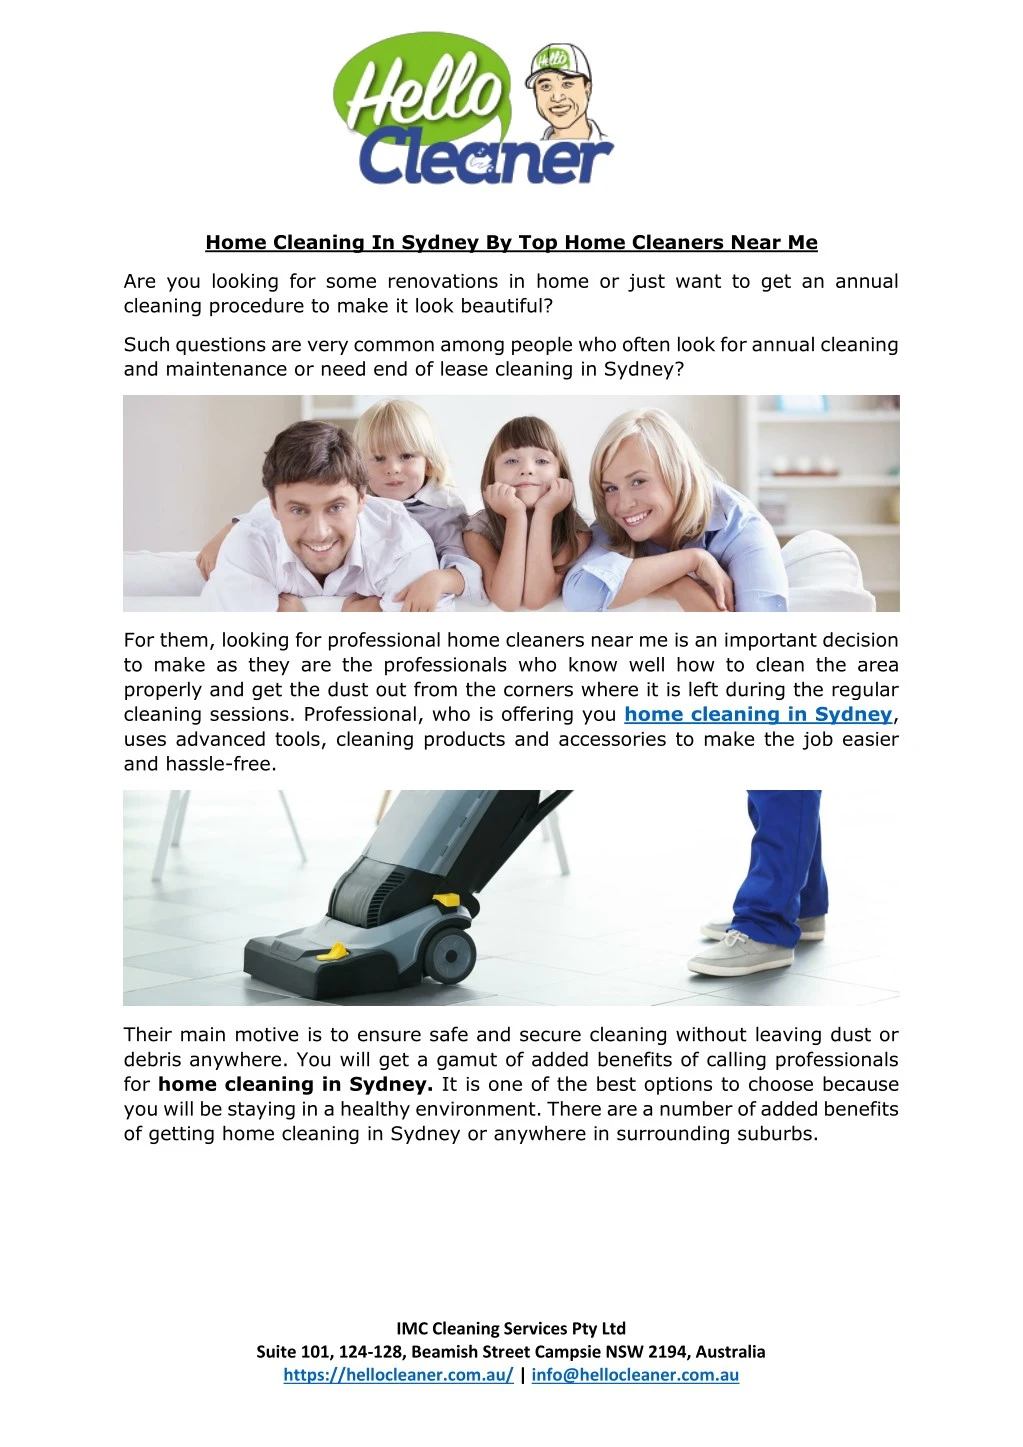 home cleaning in sydney by top home cleaners near